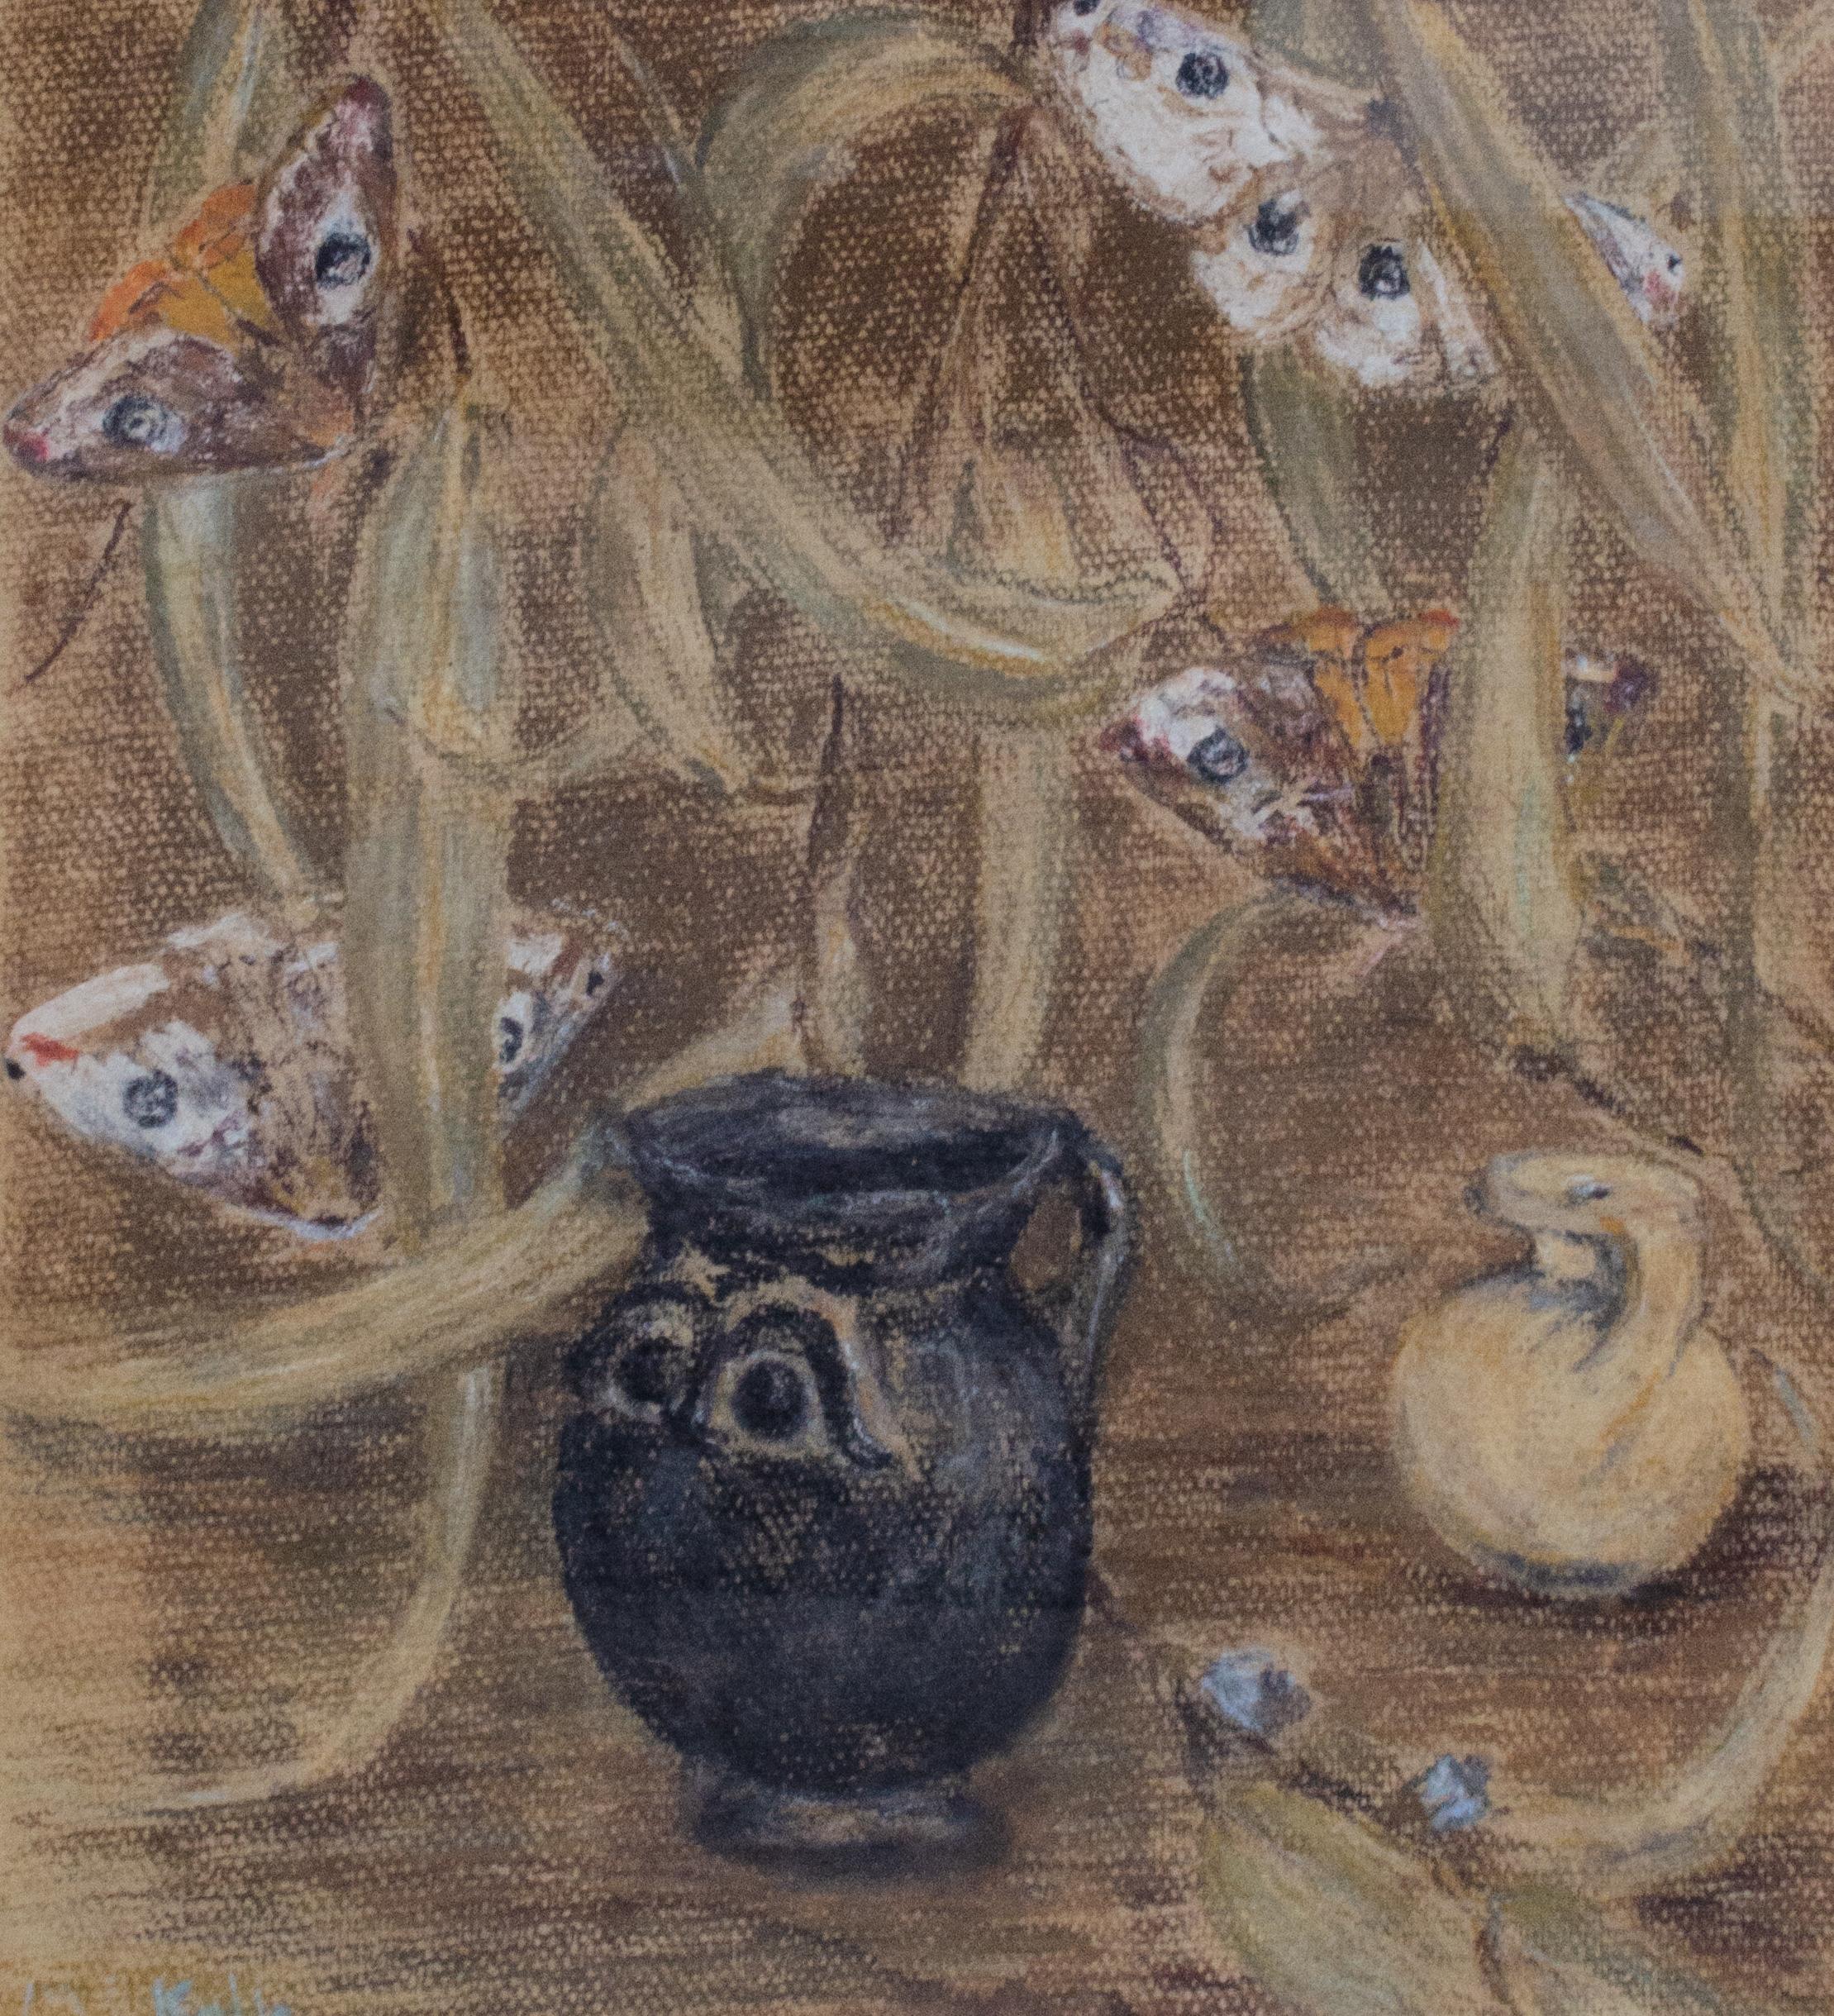 Mystery Artist
Untitled (Moths and Pots), c. Late 20th/Early 21st Century
Pastel and pencil on paper
Sight: 11 3/4 x 11 1/4 in.
Framed: 18 x 17 1/4 x 7/8 in.
Signed lower right